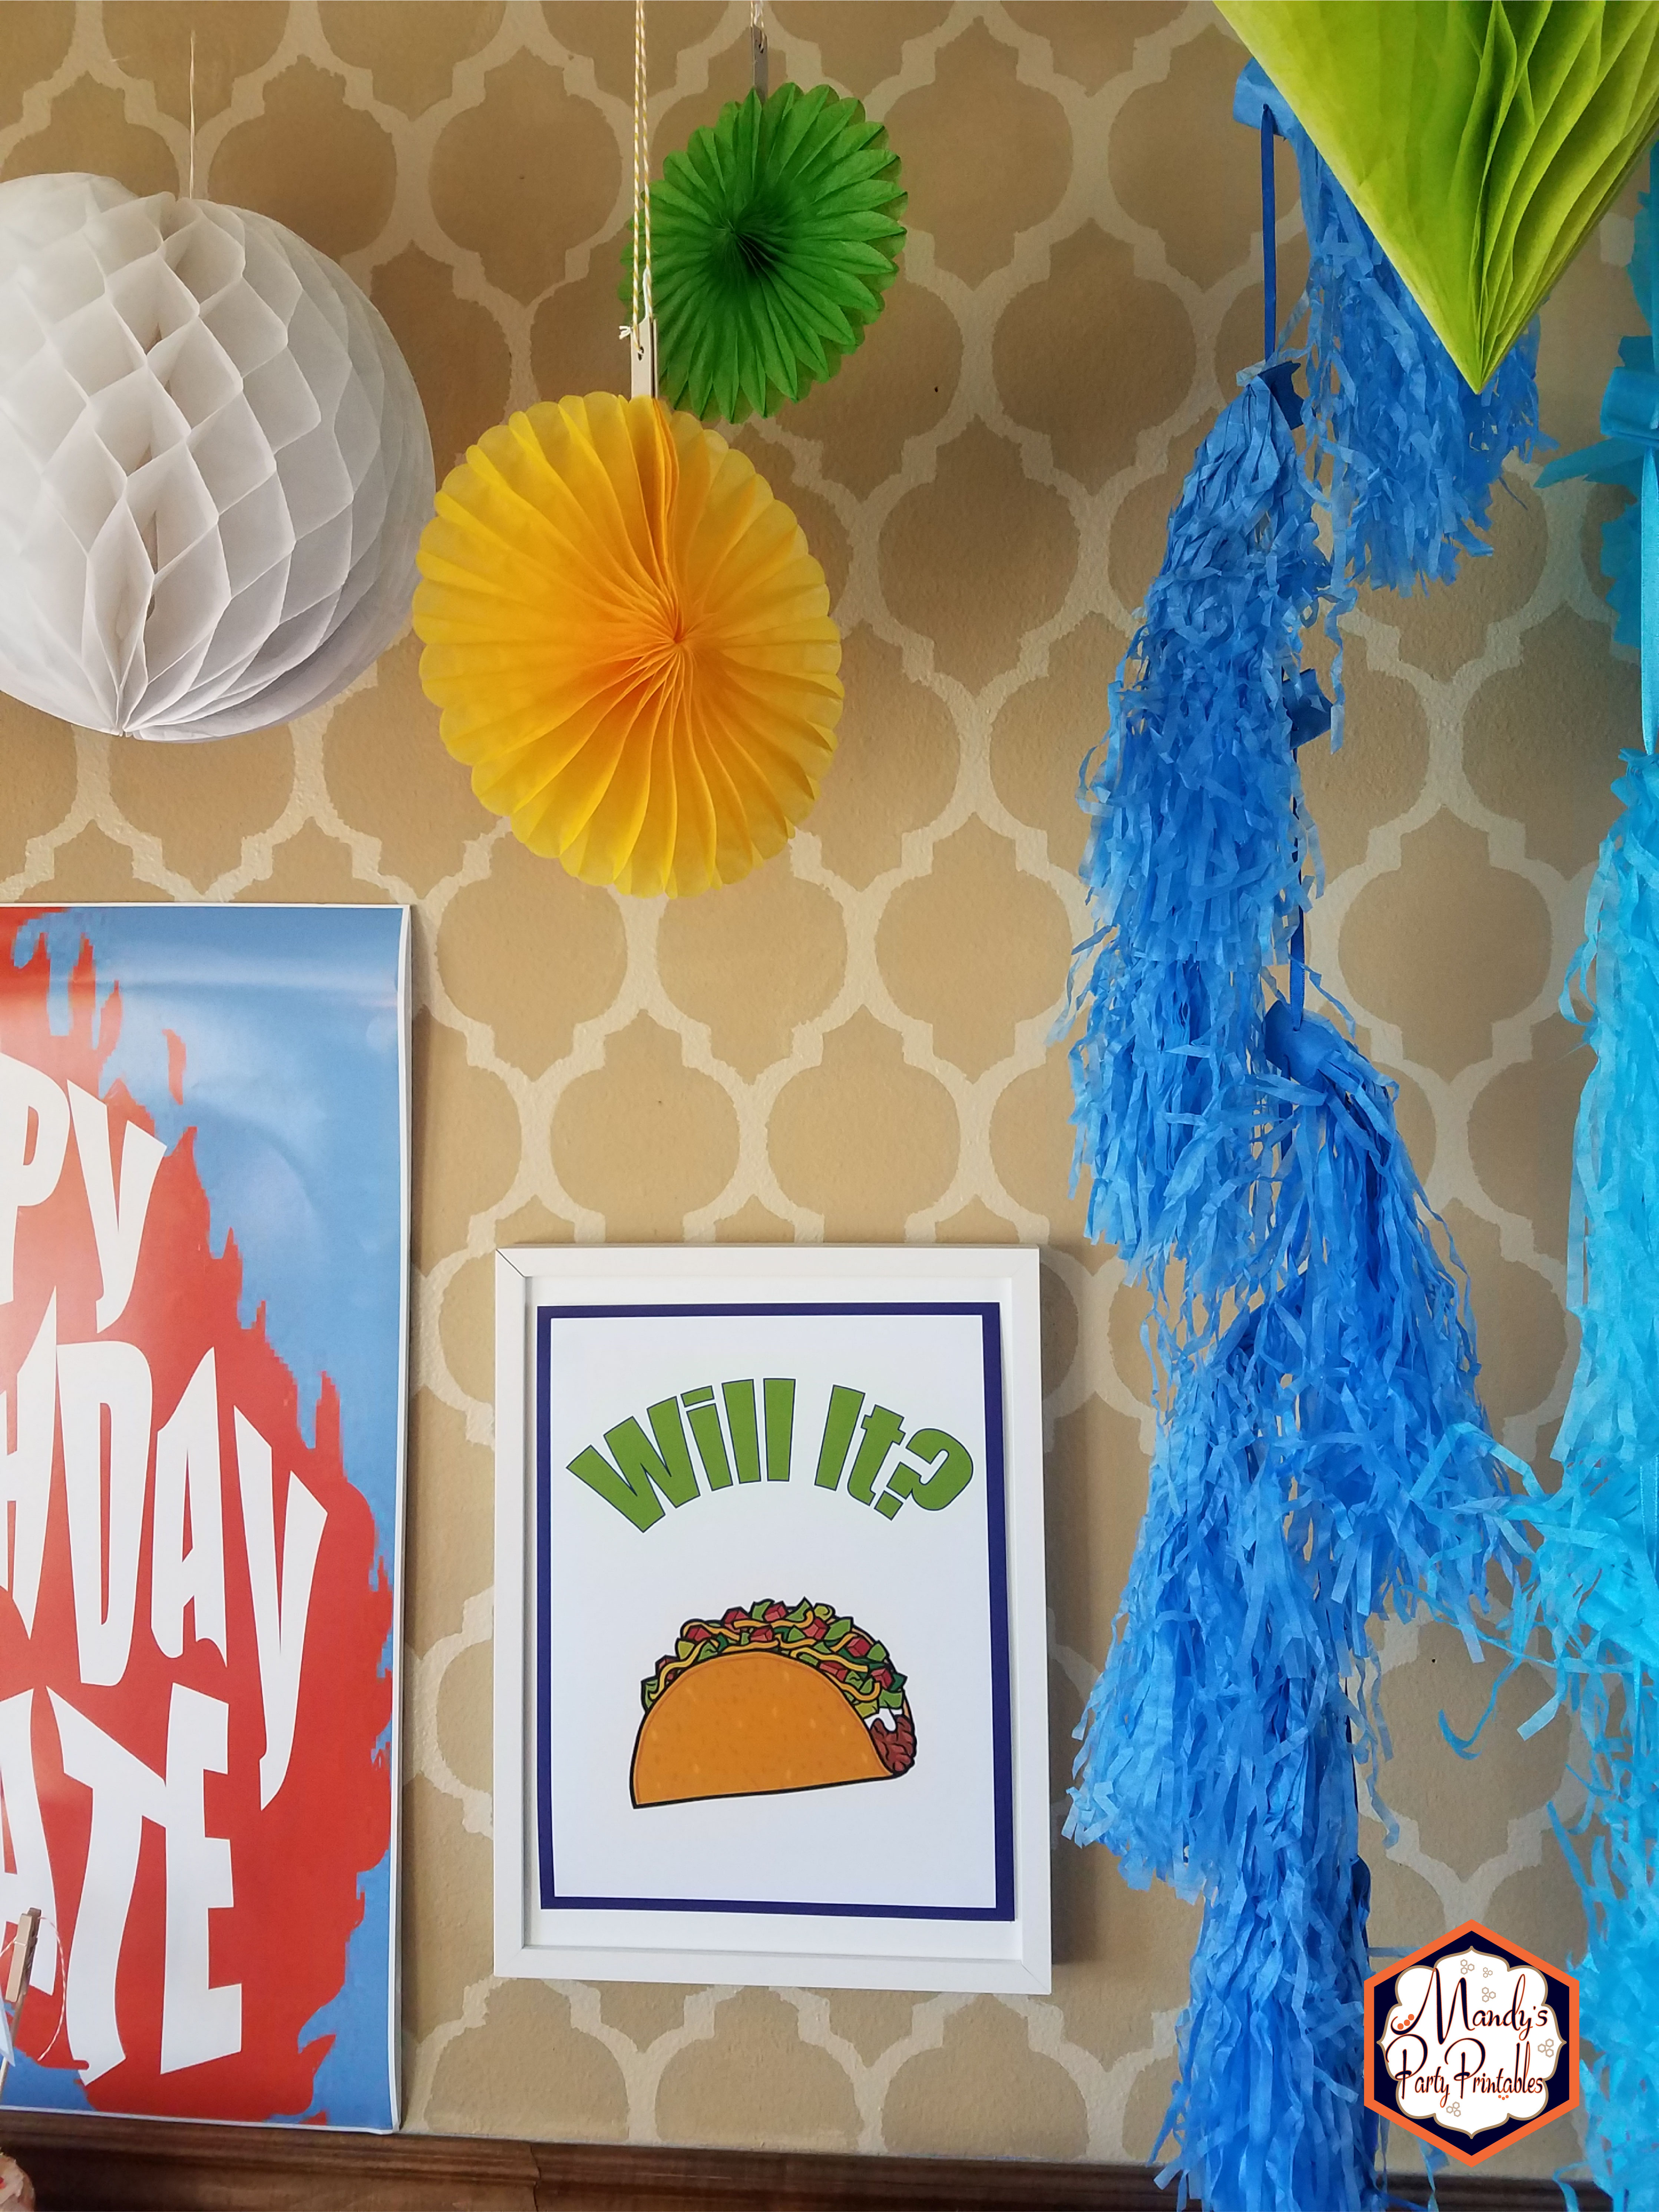 Will It Taco sign from Good Mythical Morning Inspired Birthday Party via Mandy's Party Printables